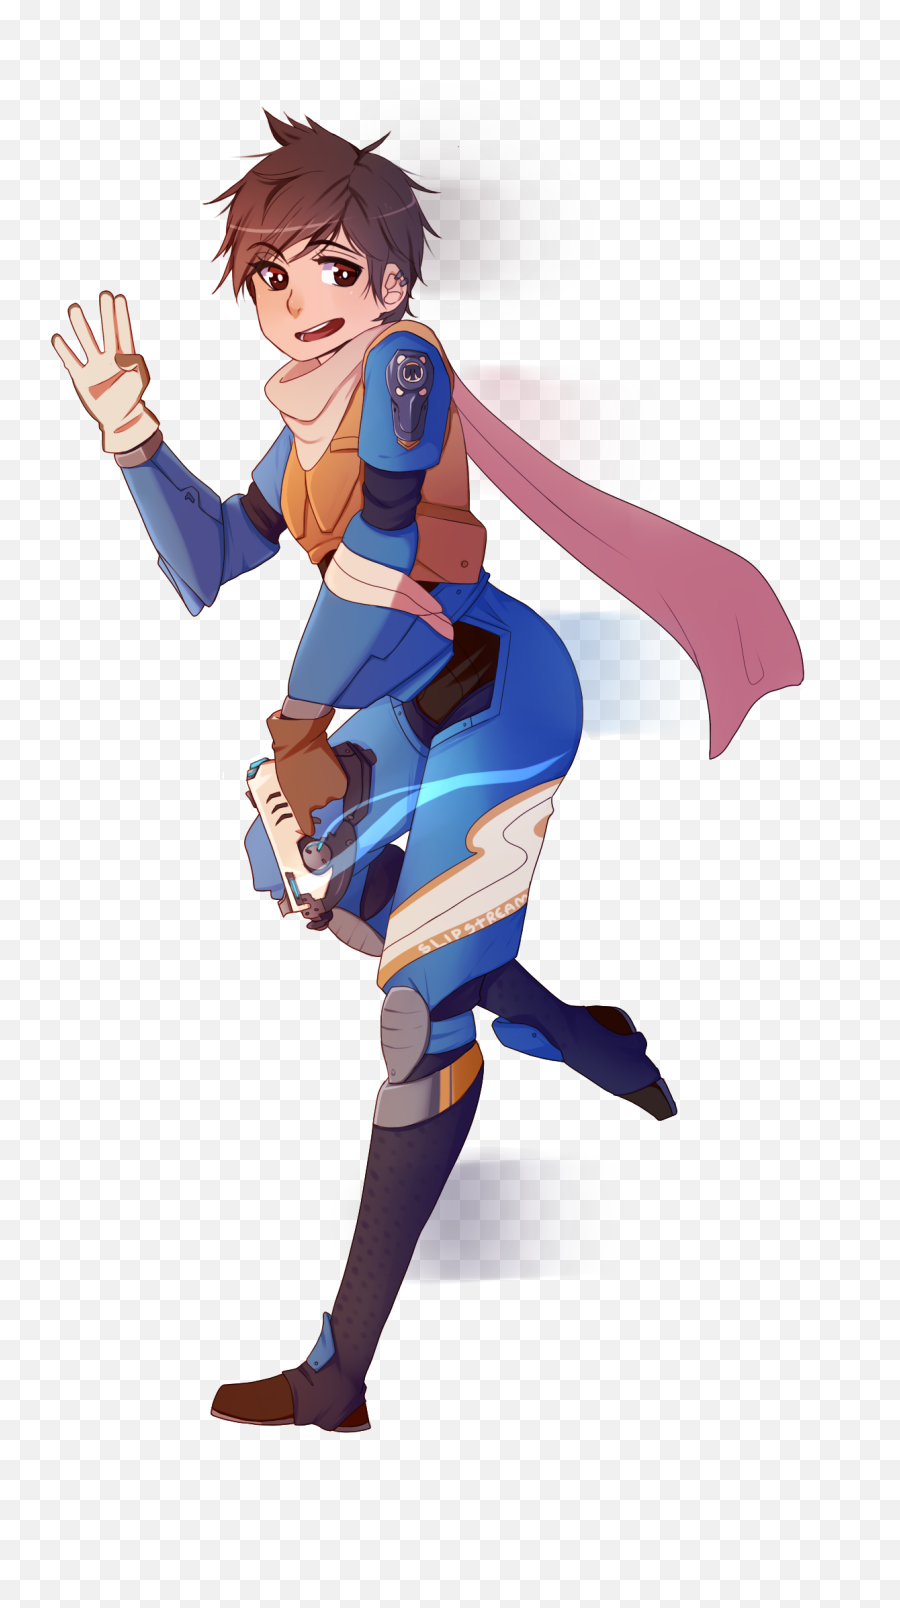 Download Hd Tracer - Cute Overwatch Tracer Fanart Png,Tracer Transparent